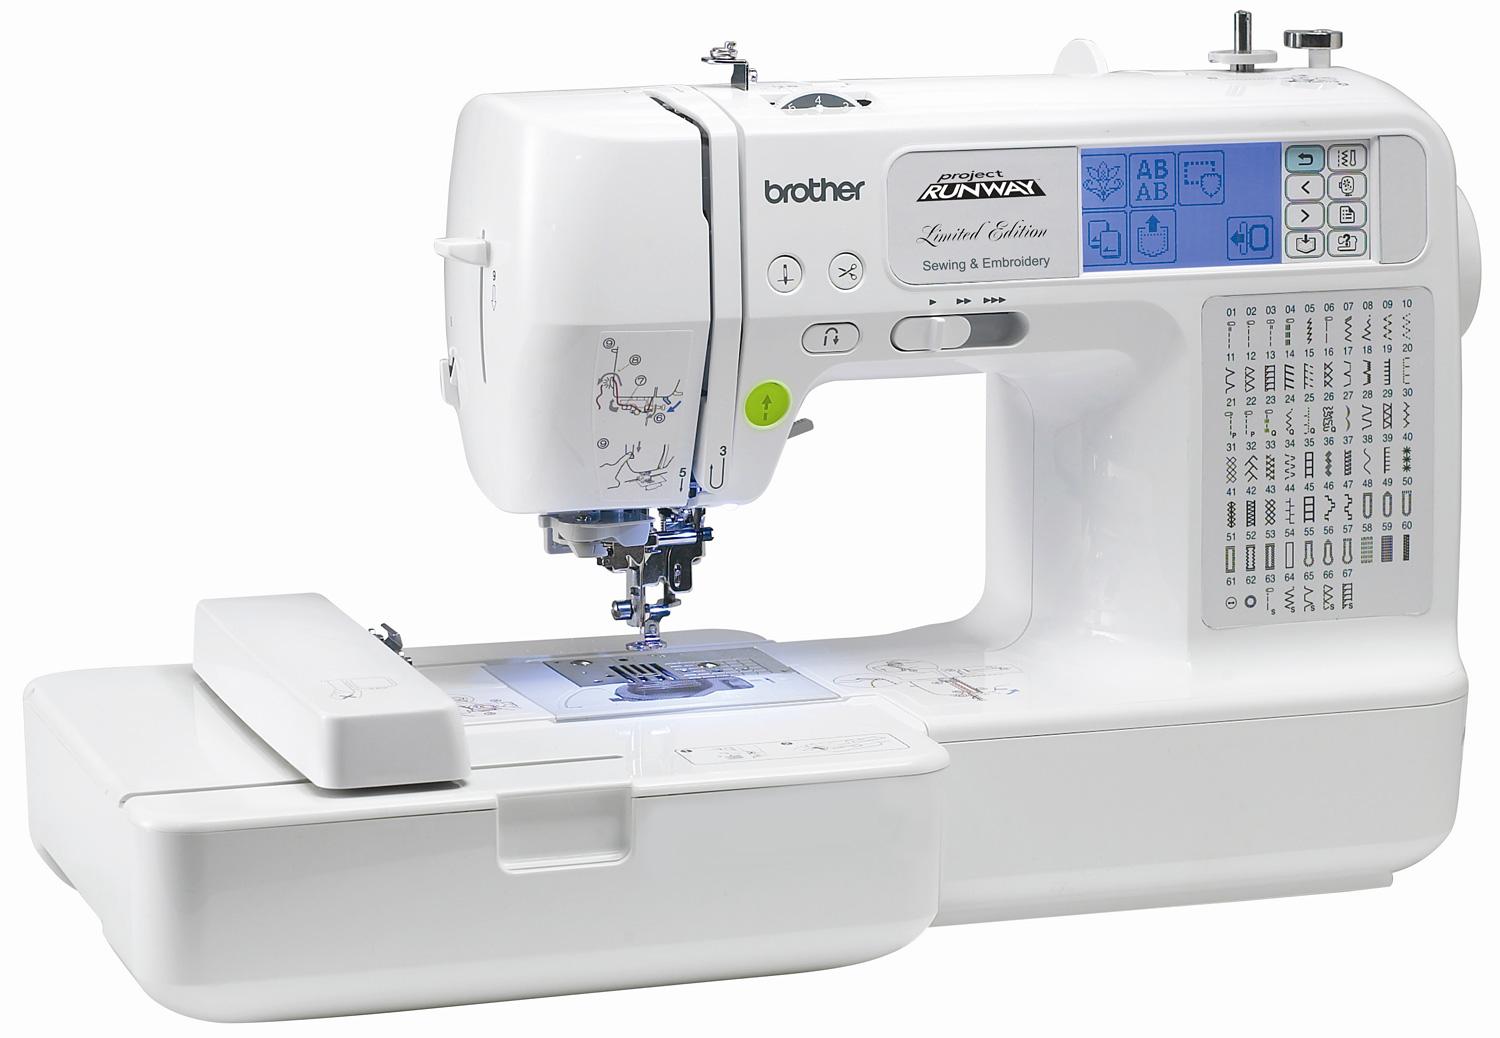 Brother LB6770-PRW Project Runway Sewing & Embroidery Machine